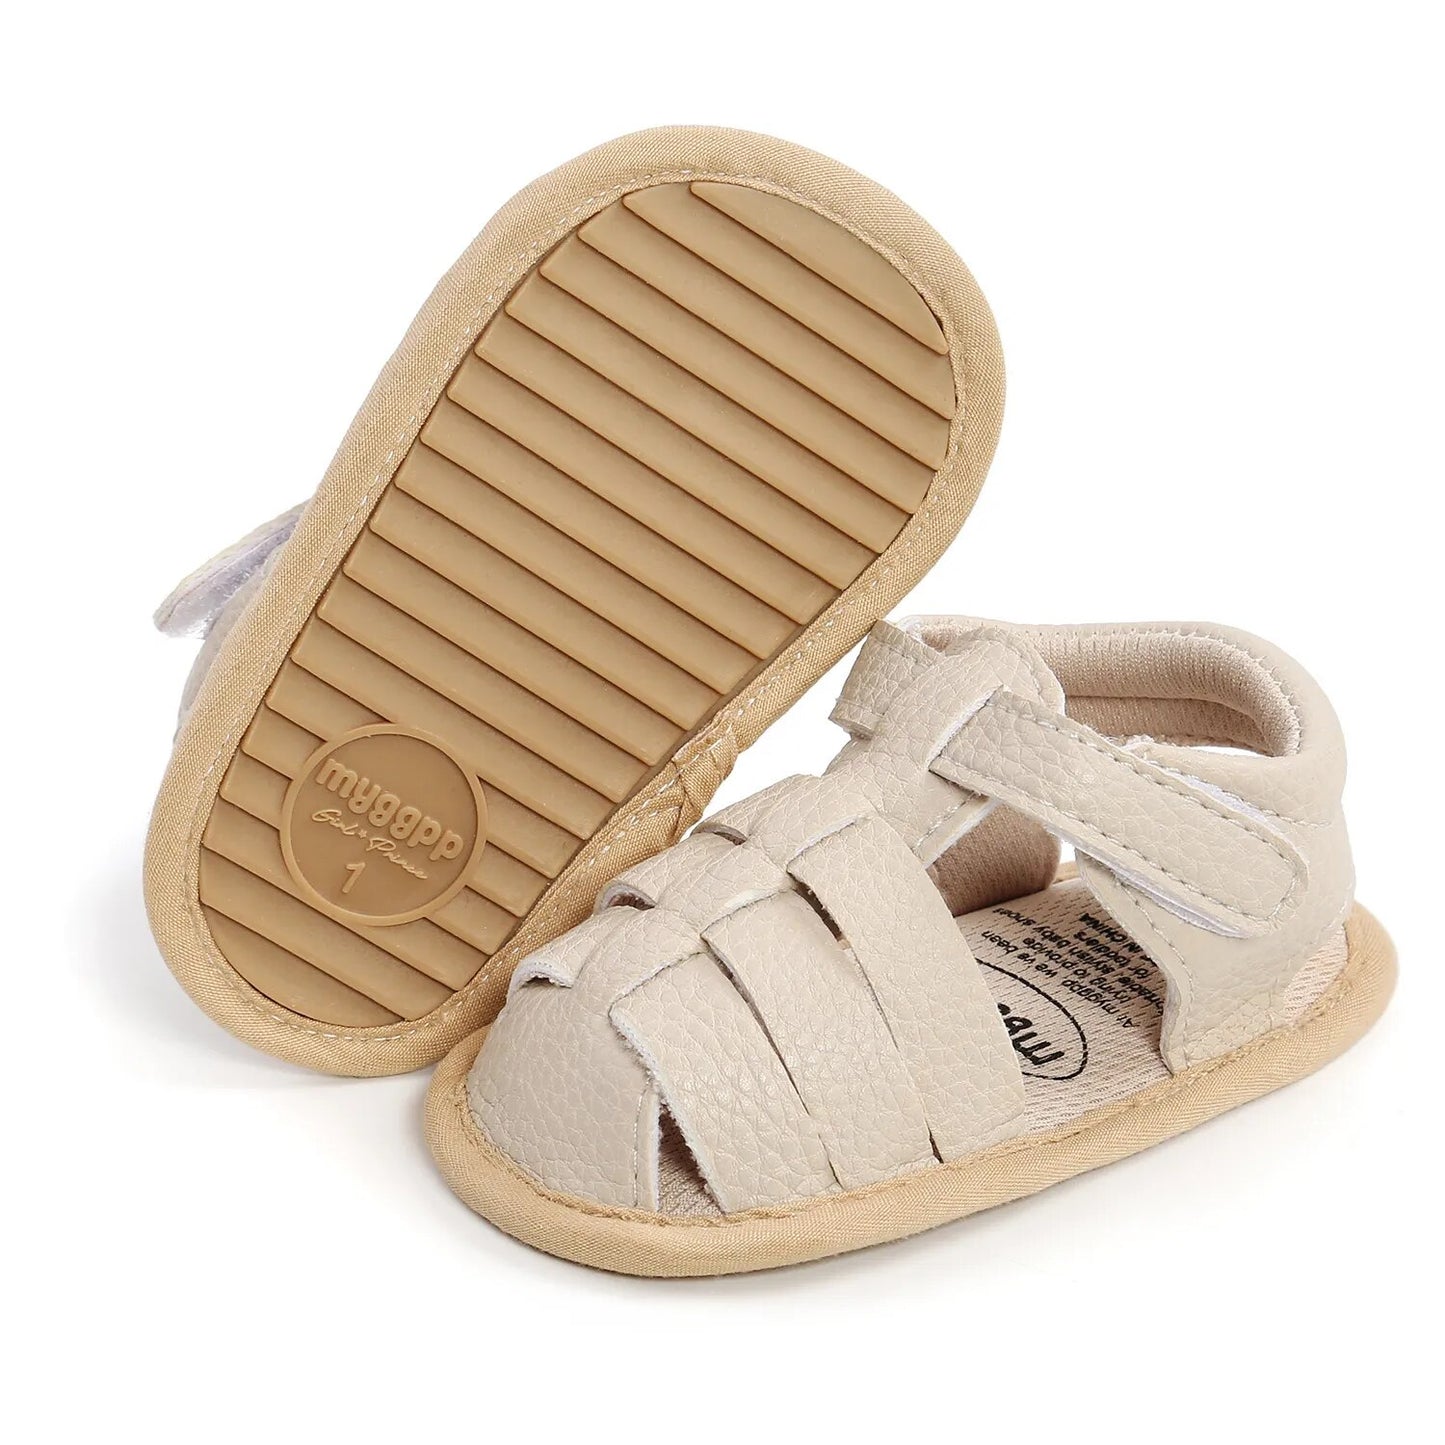 Baby Girl Summer Baby Girl Shoes Toddler Flats Sandals Soft Rubber Sole Anti-Slip Shoes - BGSD50785